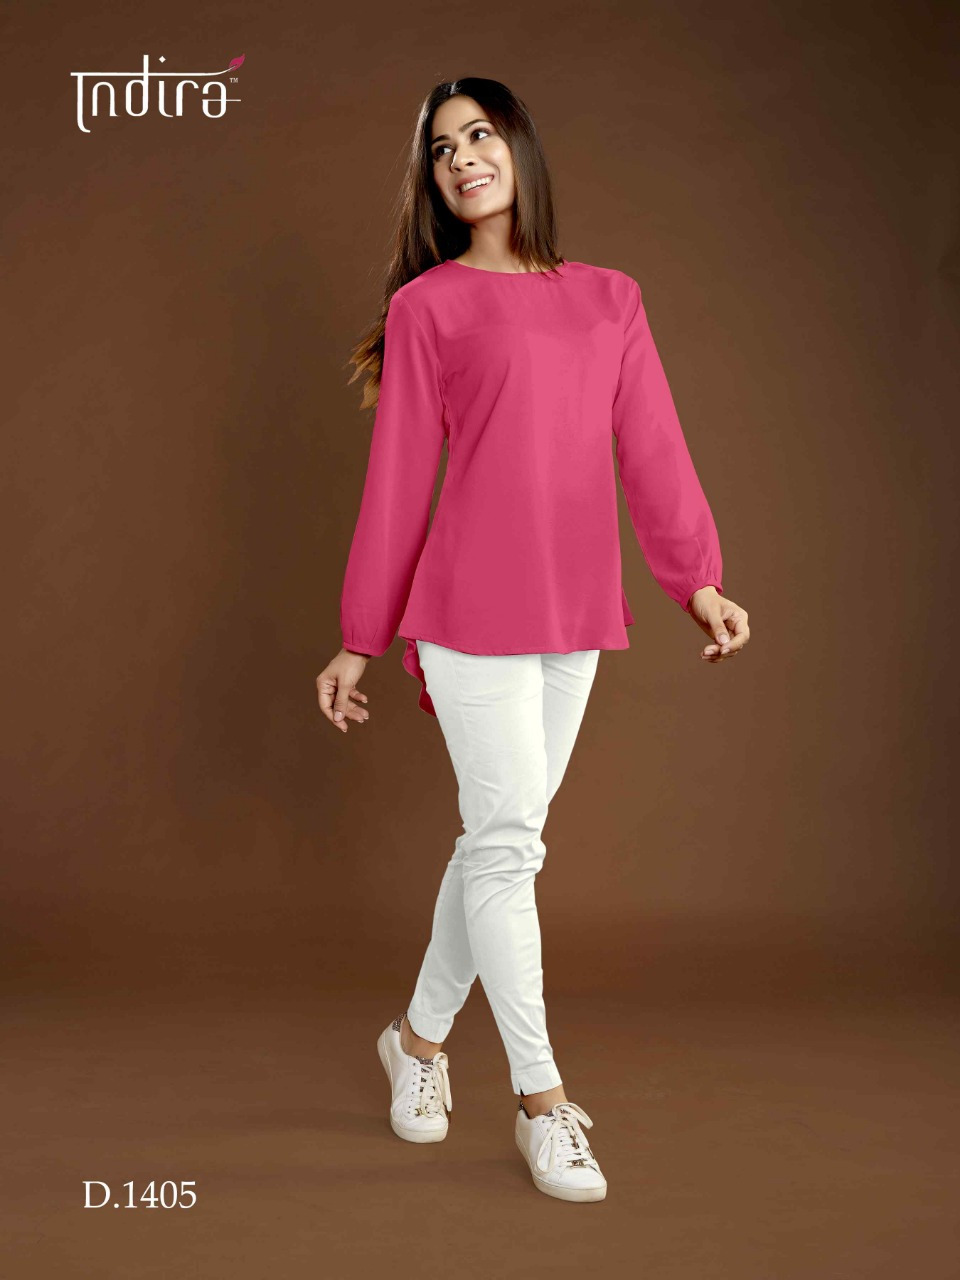 indira apparel forever colorful casual wear tops at reasonable rat